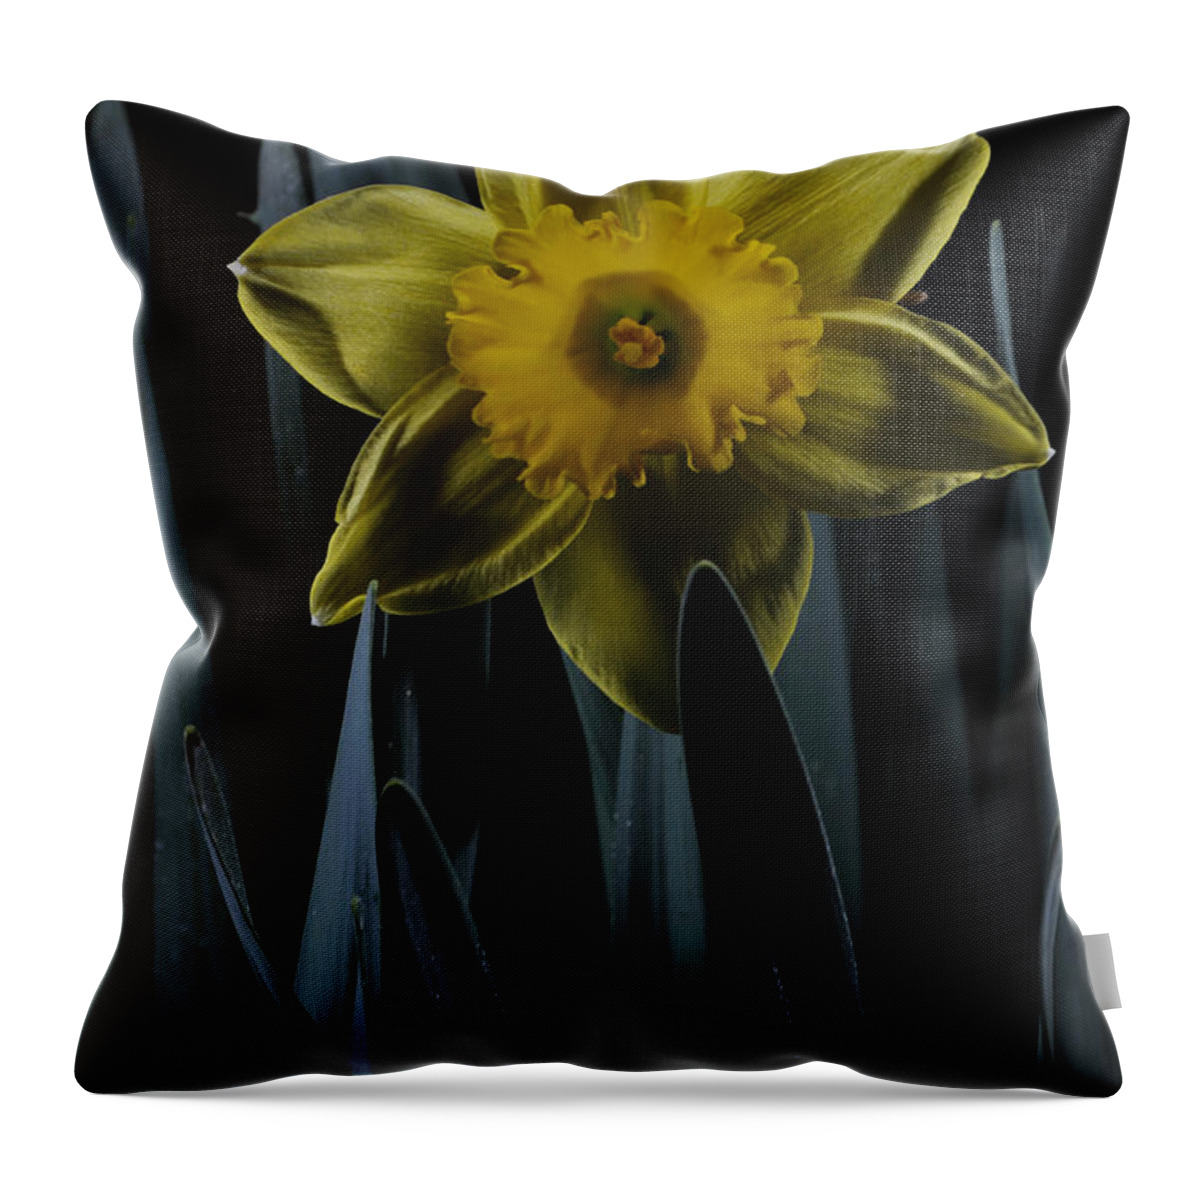 Daffodil Throw Pillow featuring the photograph Daffodil By Moonlight by Mark Fuller